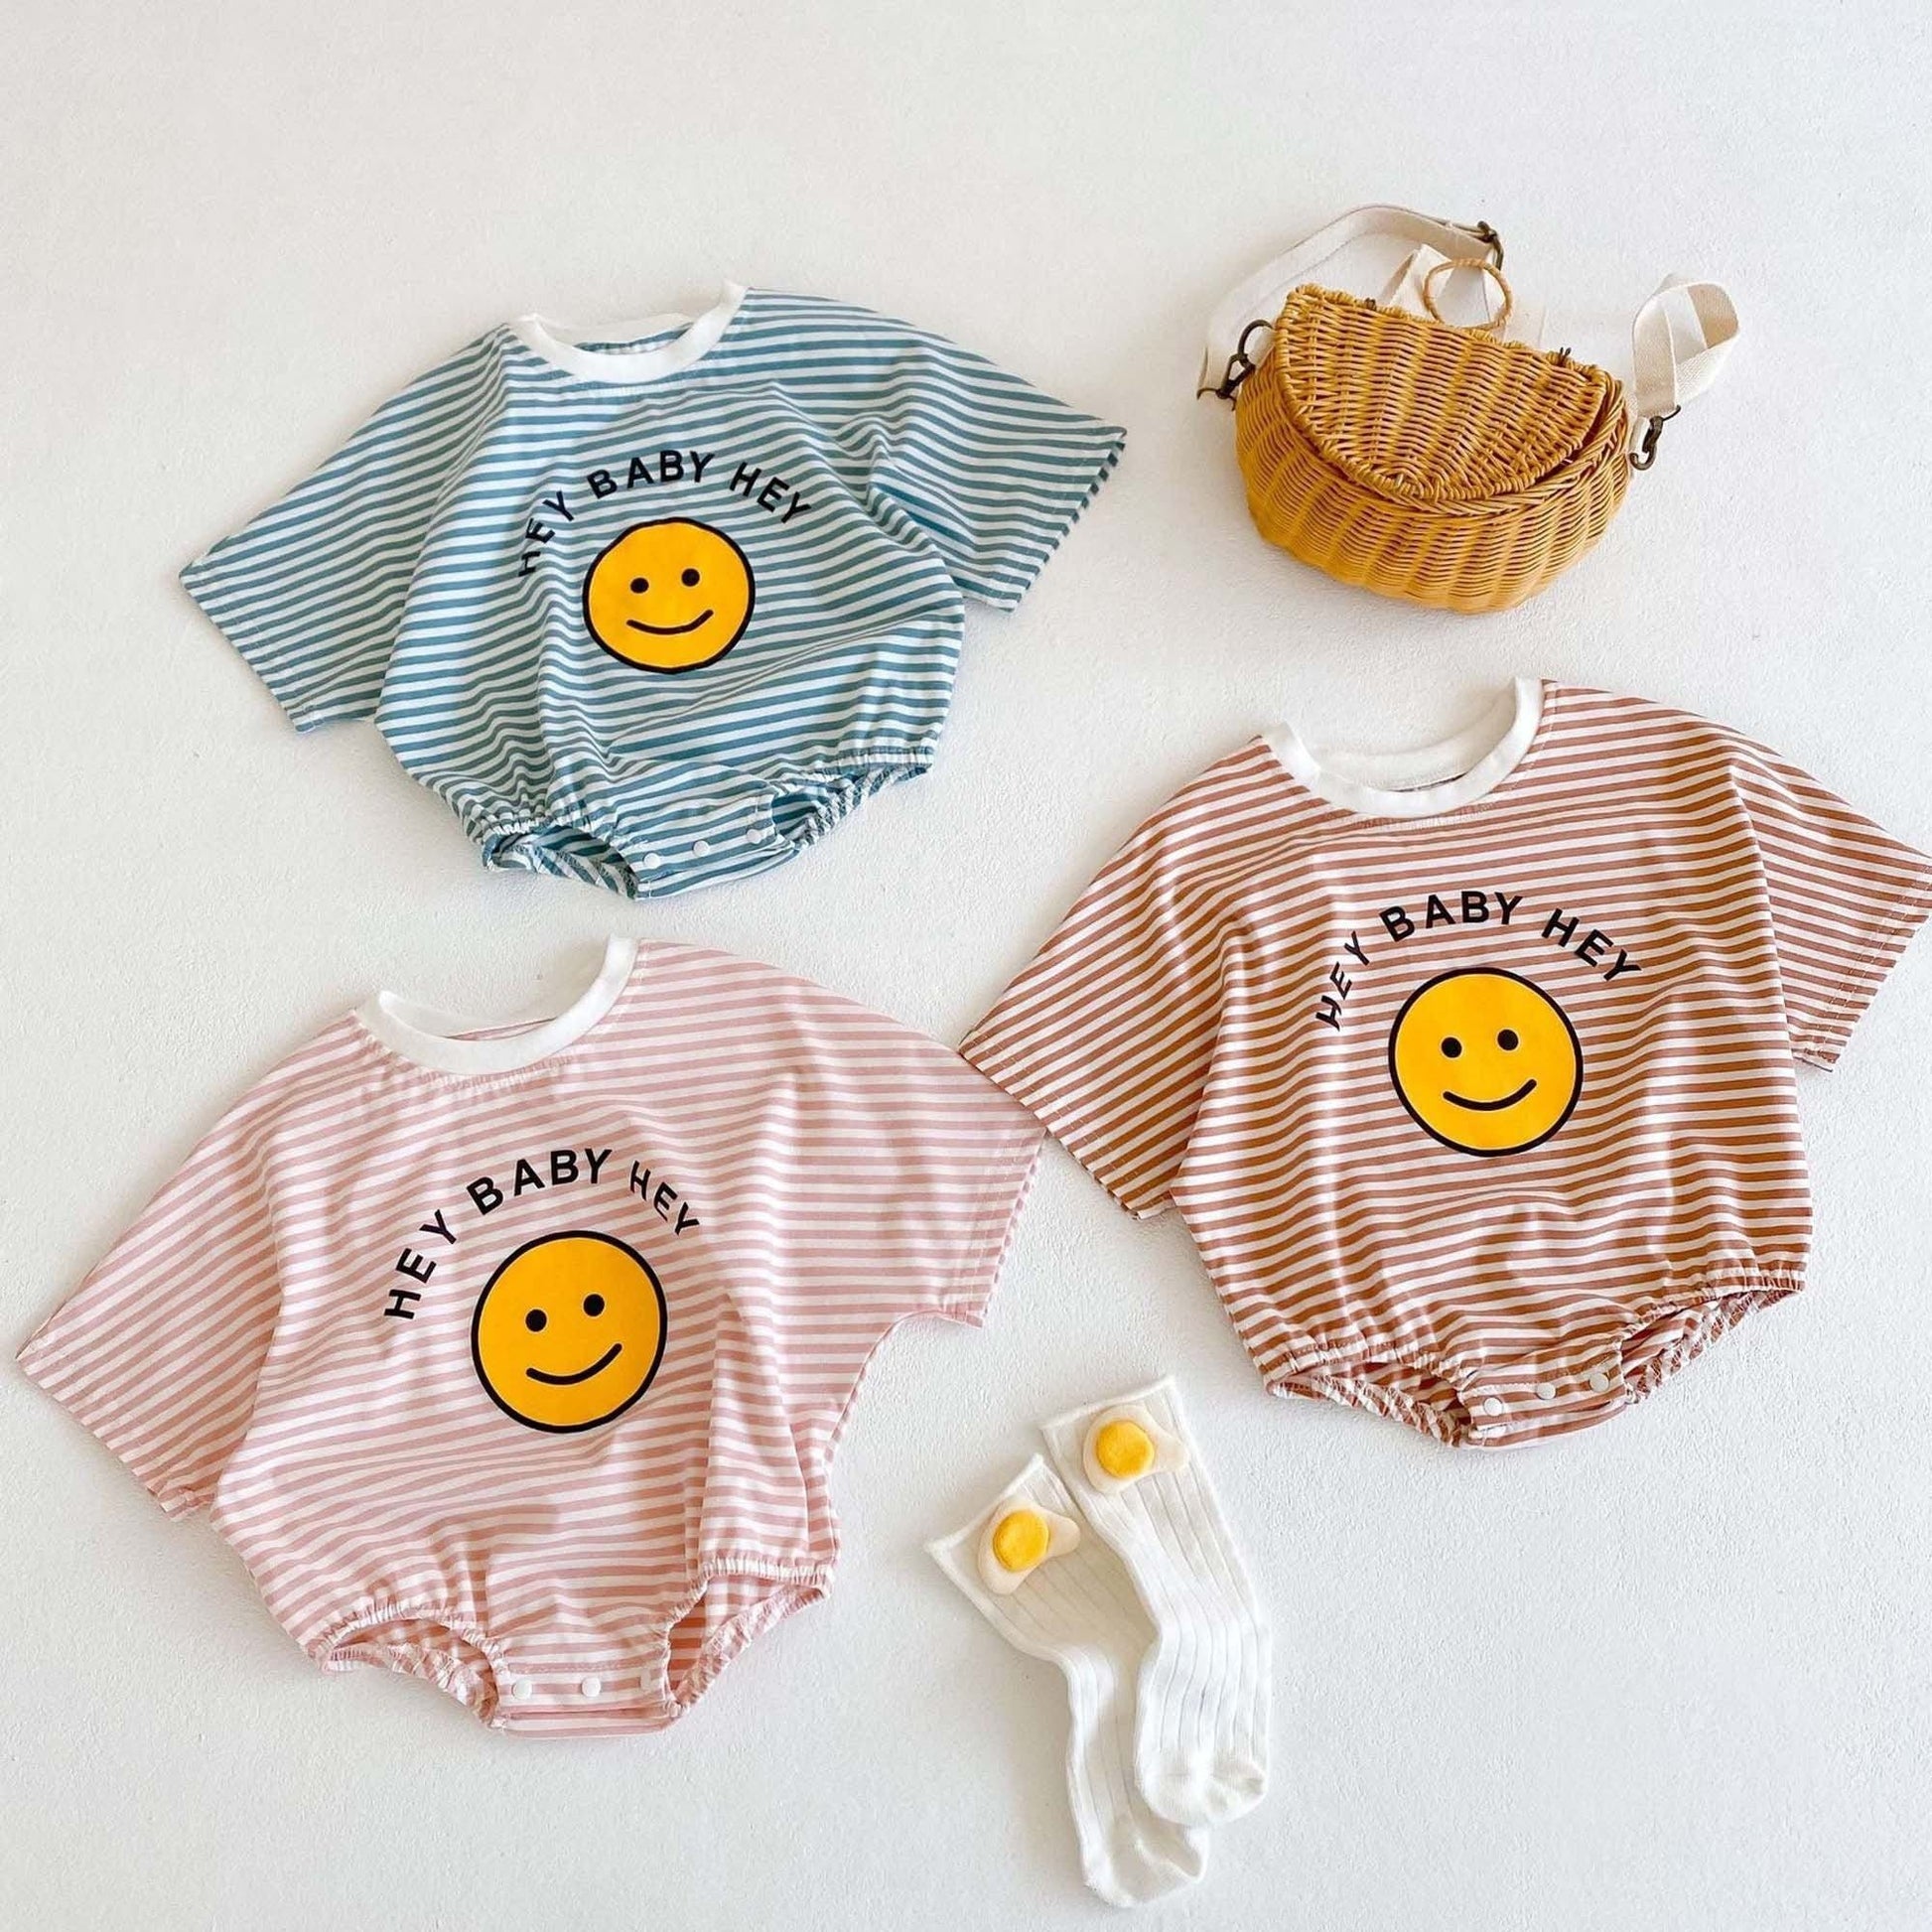 Smiley Face Bubble Romper, Happy Face Toddler Outfit, Cute Kids Clothes,  Sweater Onesie, Retro Groovy Kids Clothing, Smile Sweatshirt Romper -   Israel